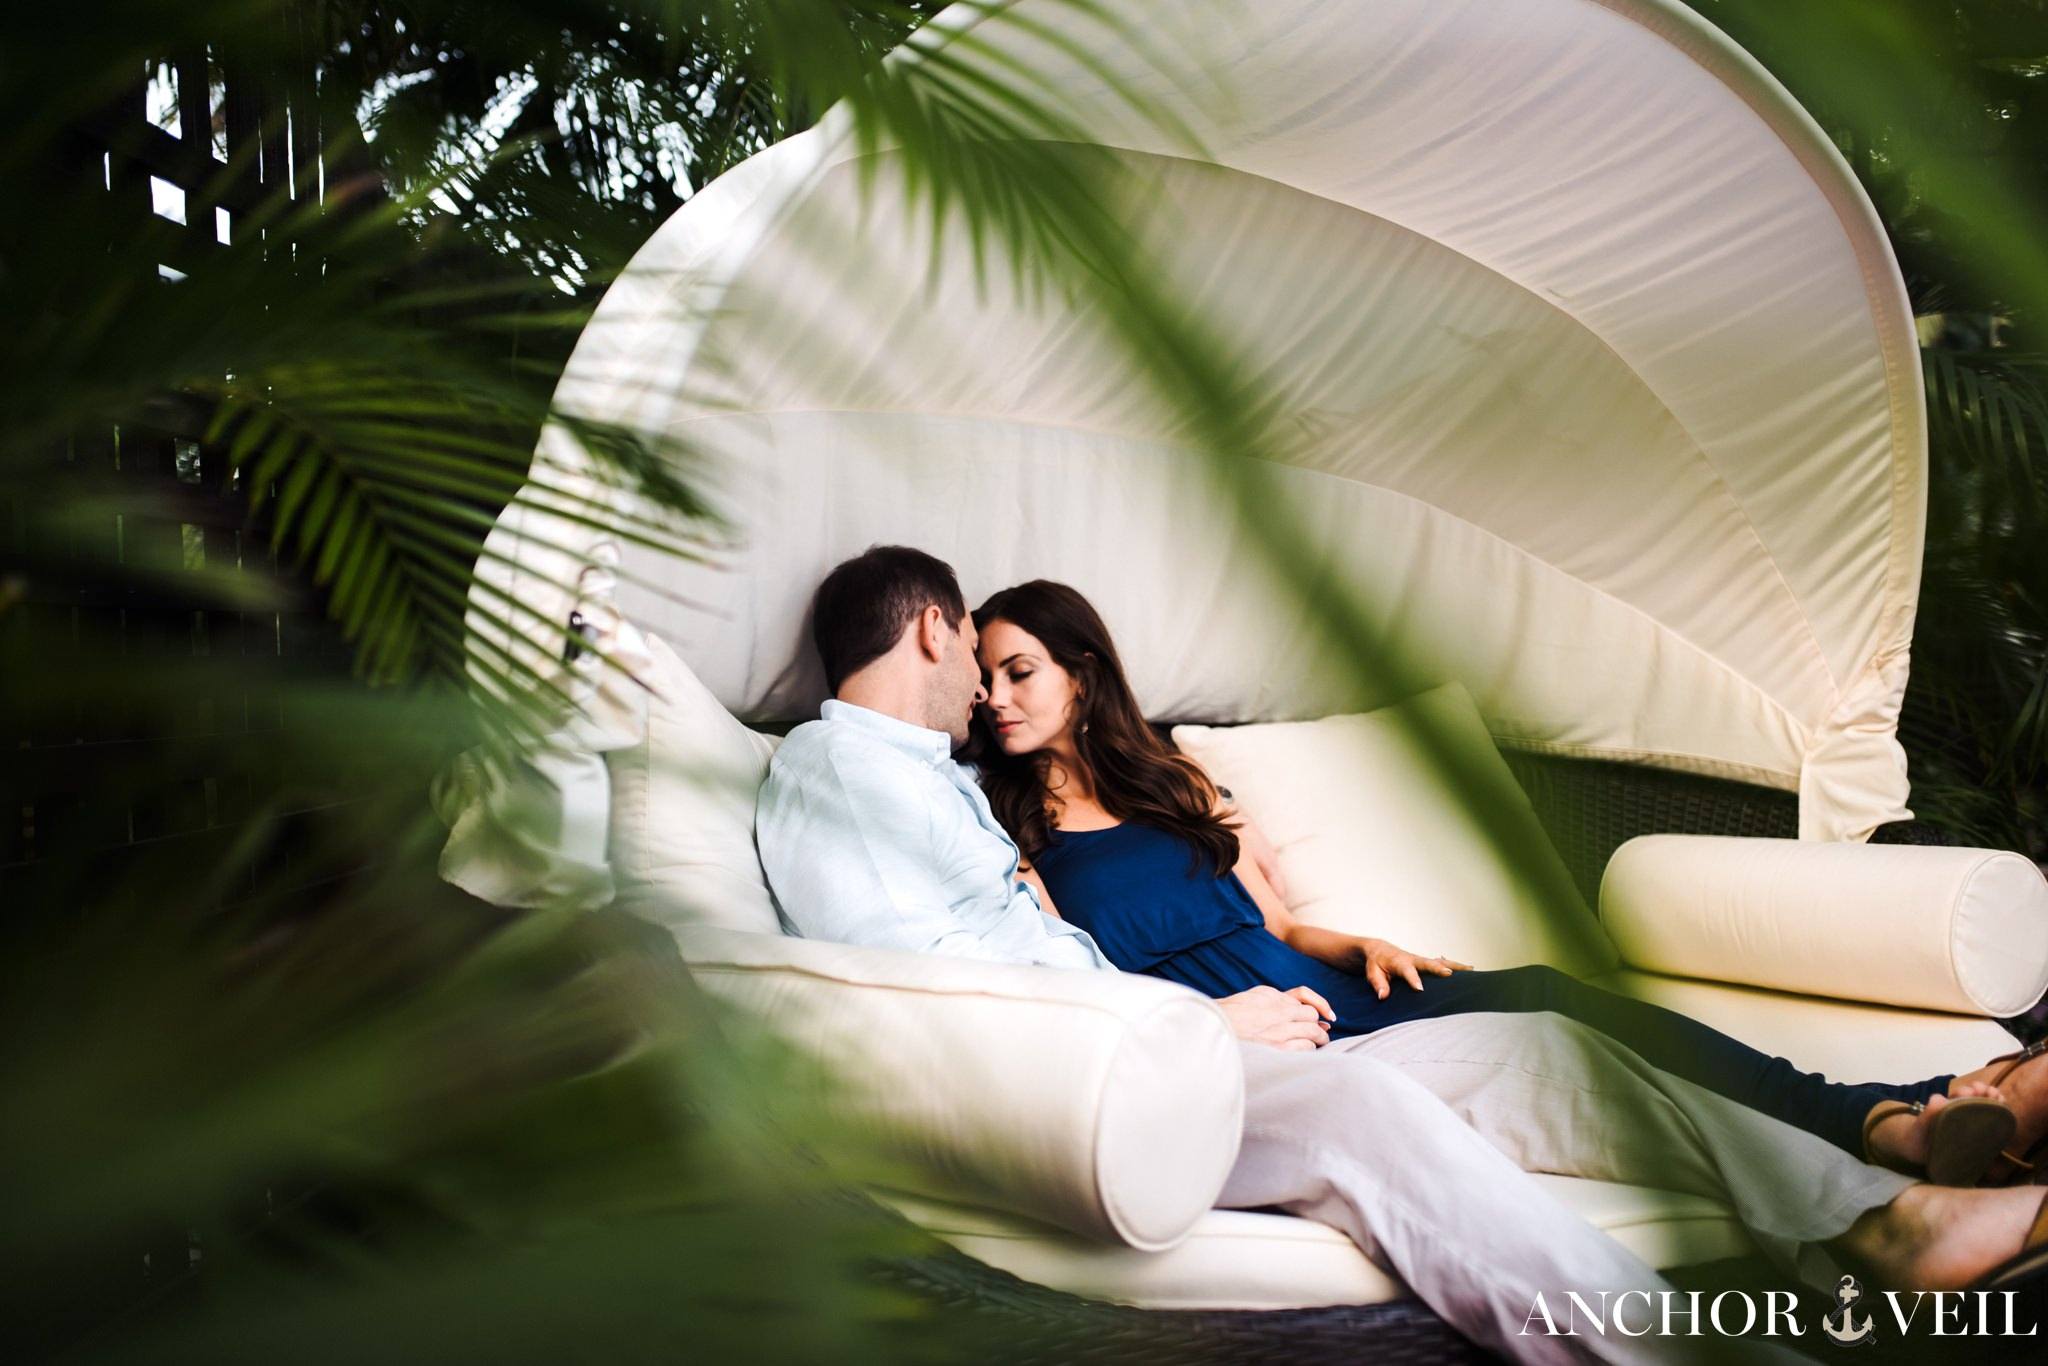 sitting in the large canopy chair by the p[ool at Hermitage Bay wedding Shoot